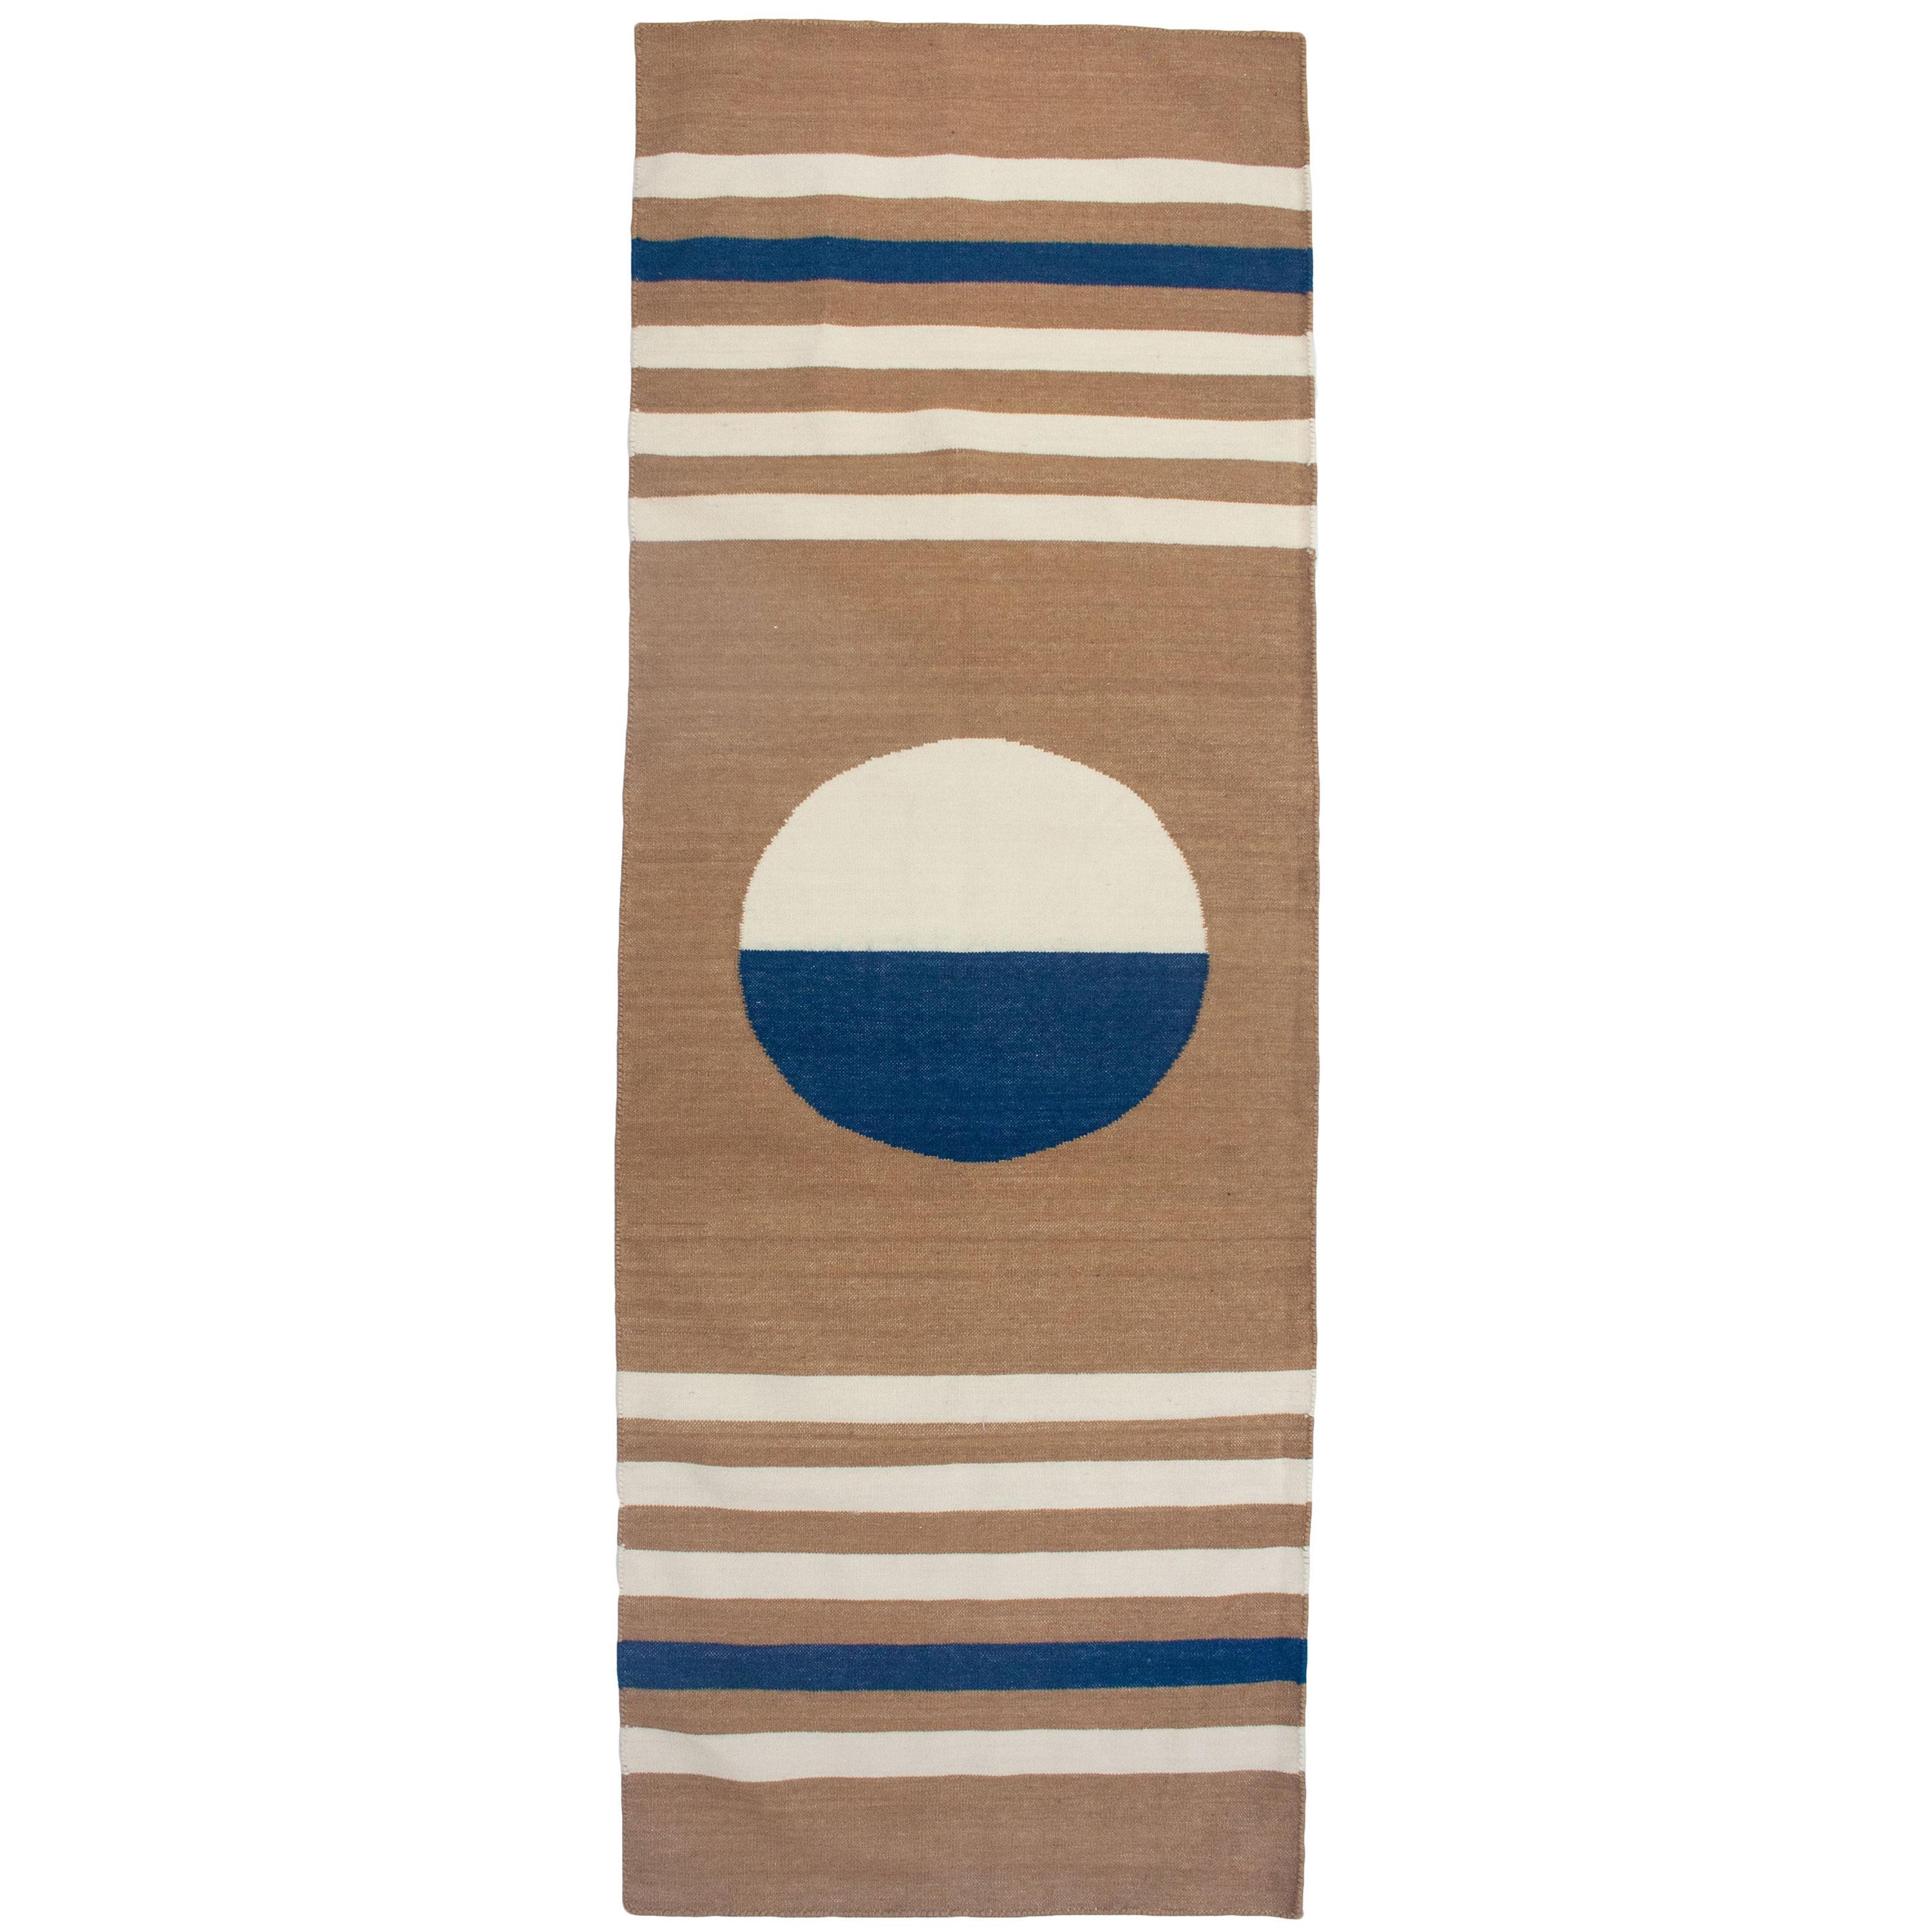 Luna Stripes and Circle Handwoven Modern Wool Rug, Carpet and Durrie